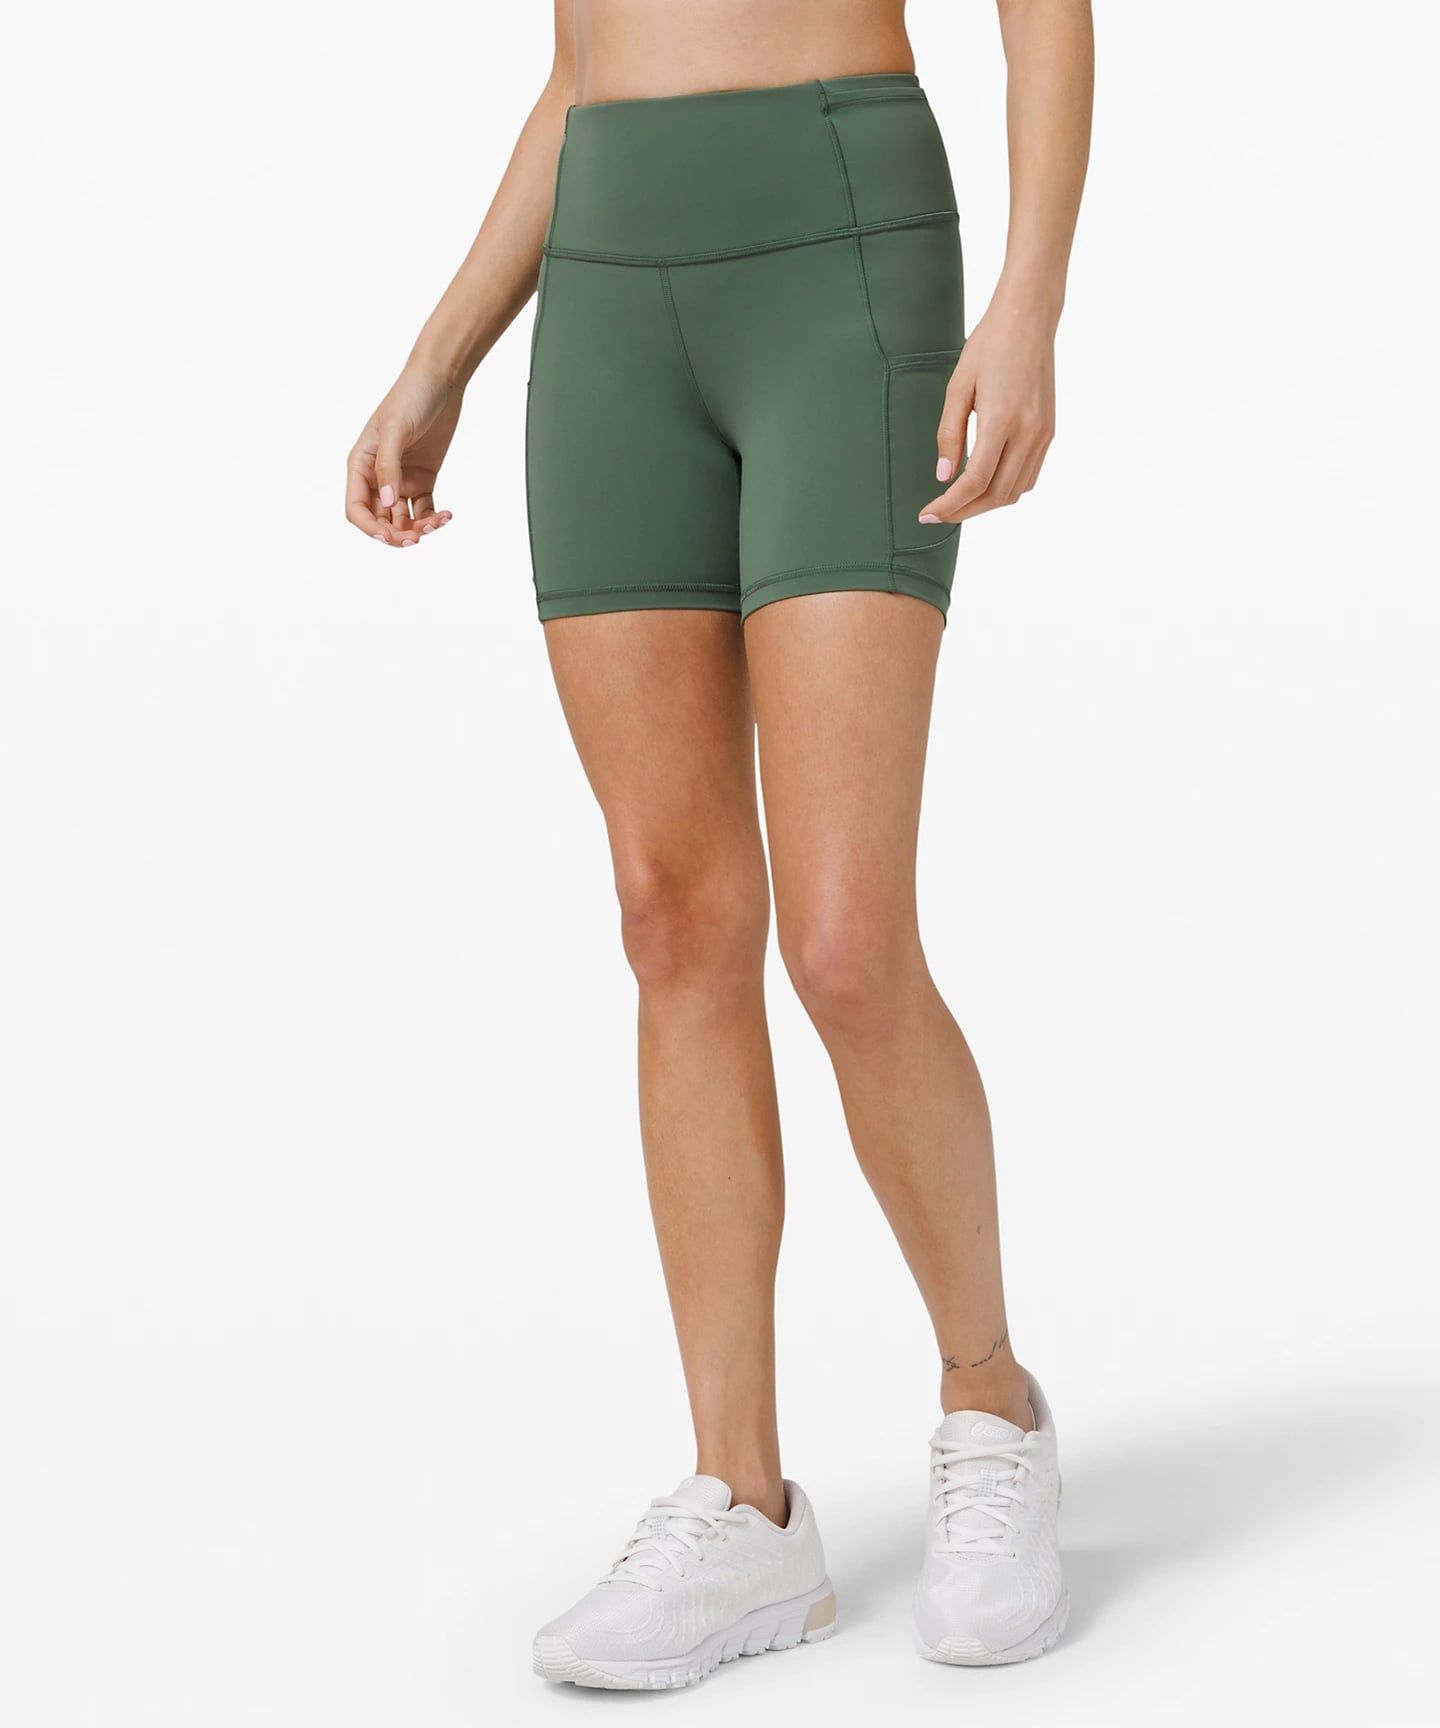 Shop lululemon For The Most Durable, Buttery-Soft Athletic Shorts For Your  Next Workout - BroBible